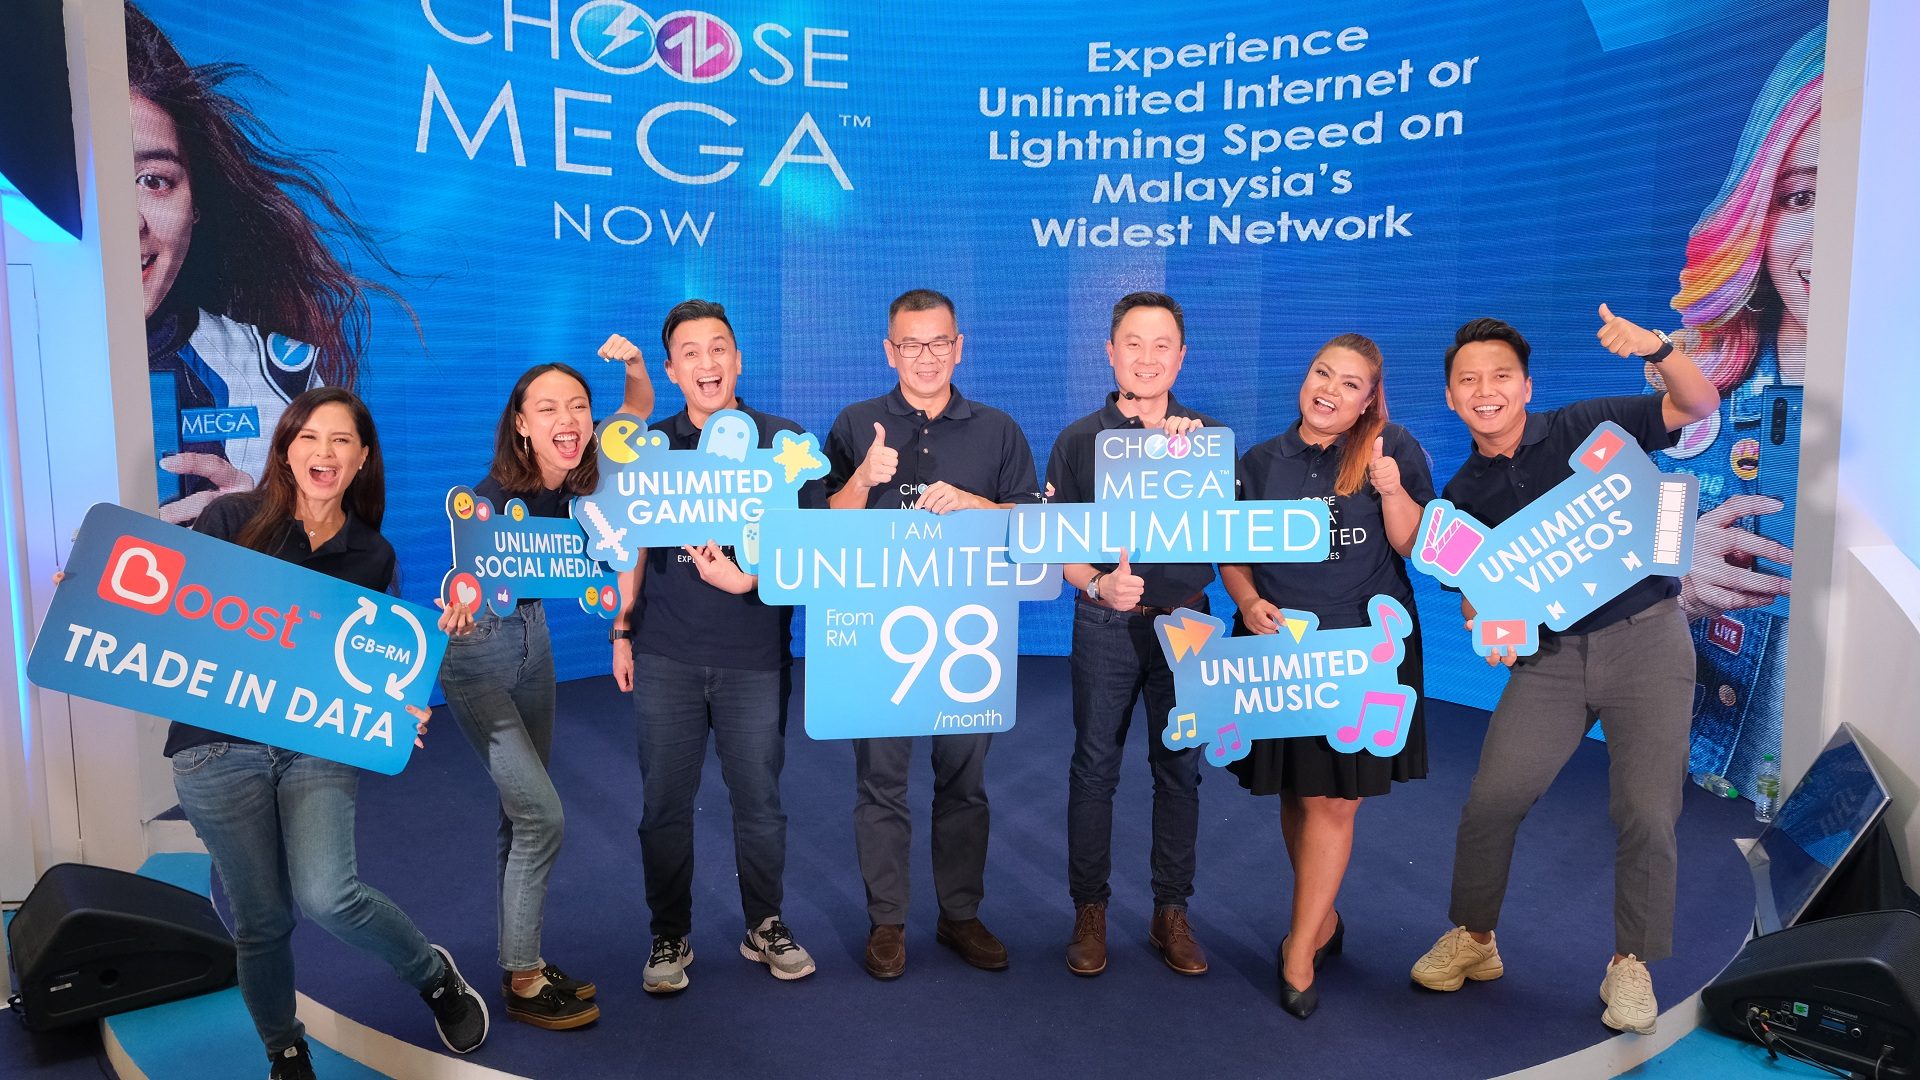 Celcom postpaid plan 2021 with phone